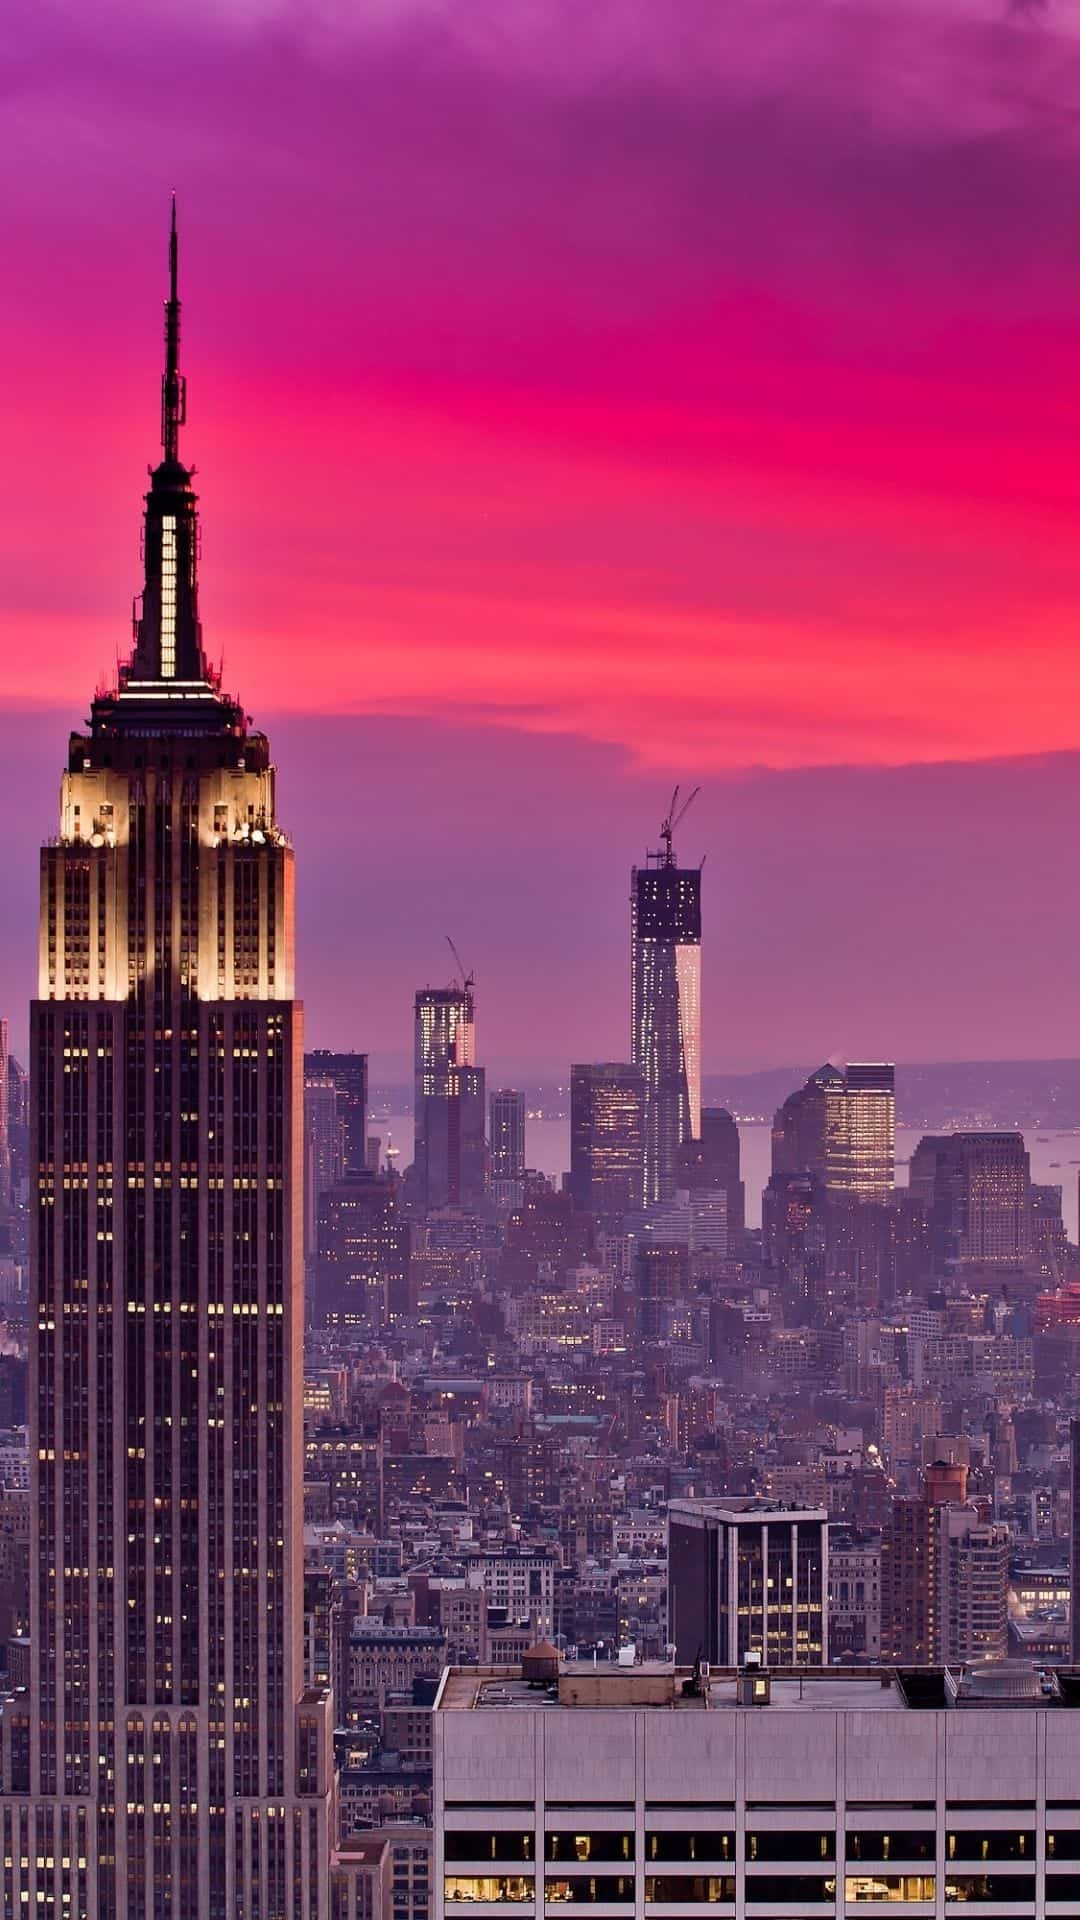 New York: The Empire State Building, Designed by Shreve, Lamb, and Harmon in the Art Deco style. 1080x1920 Full HD Wallpaper.